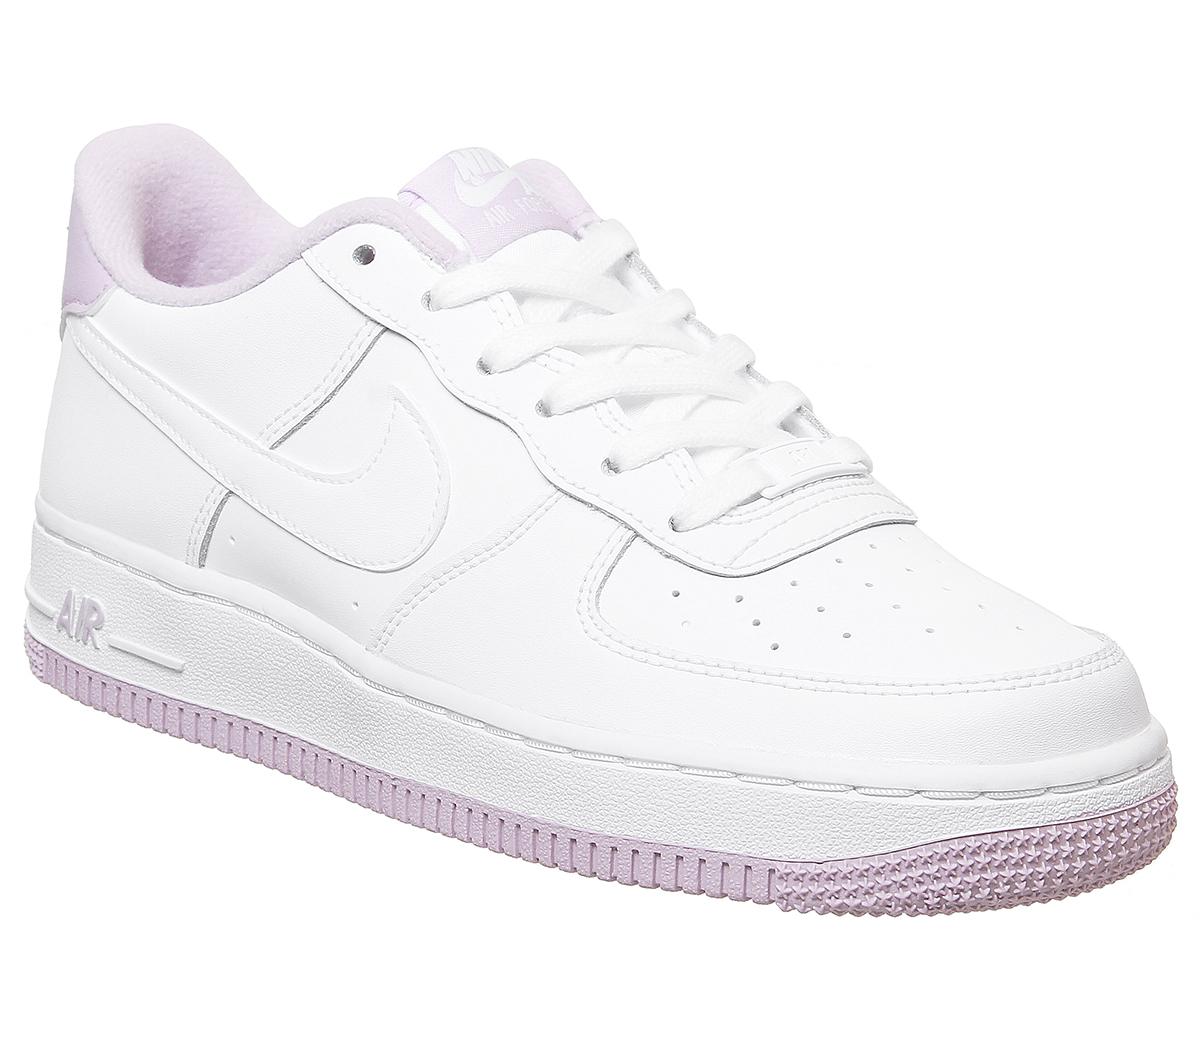 Nike Air Force 1 Trainers White White Iced Lilac - Hers trainers